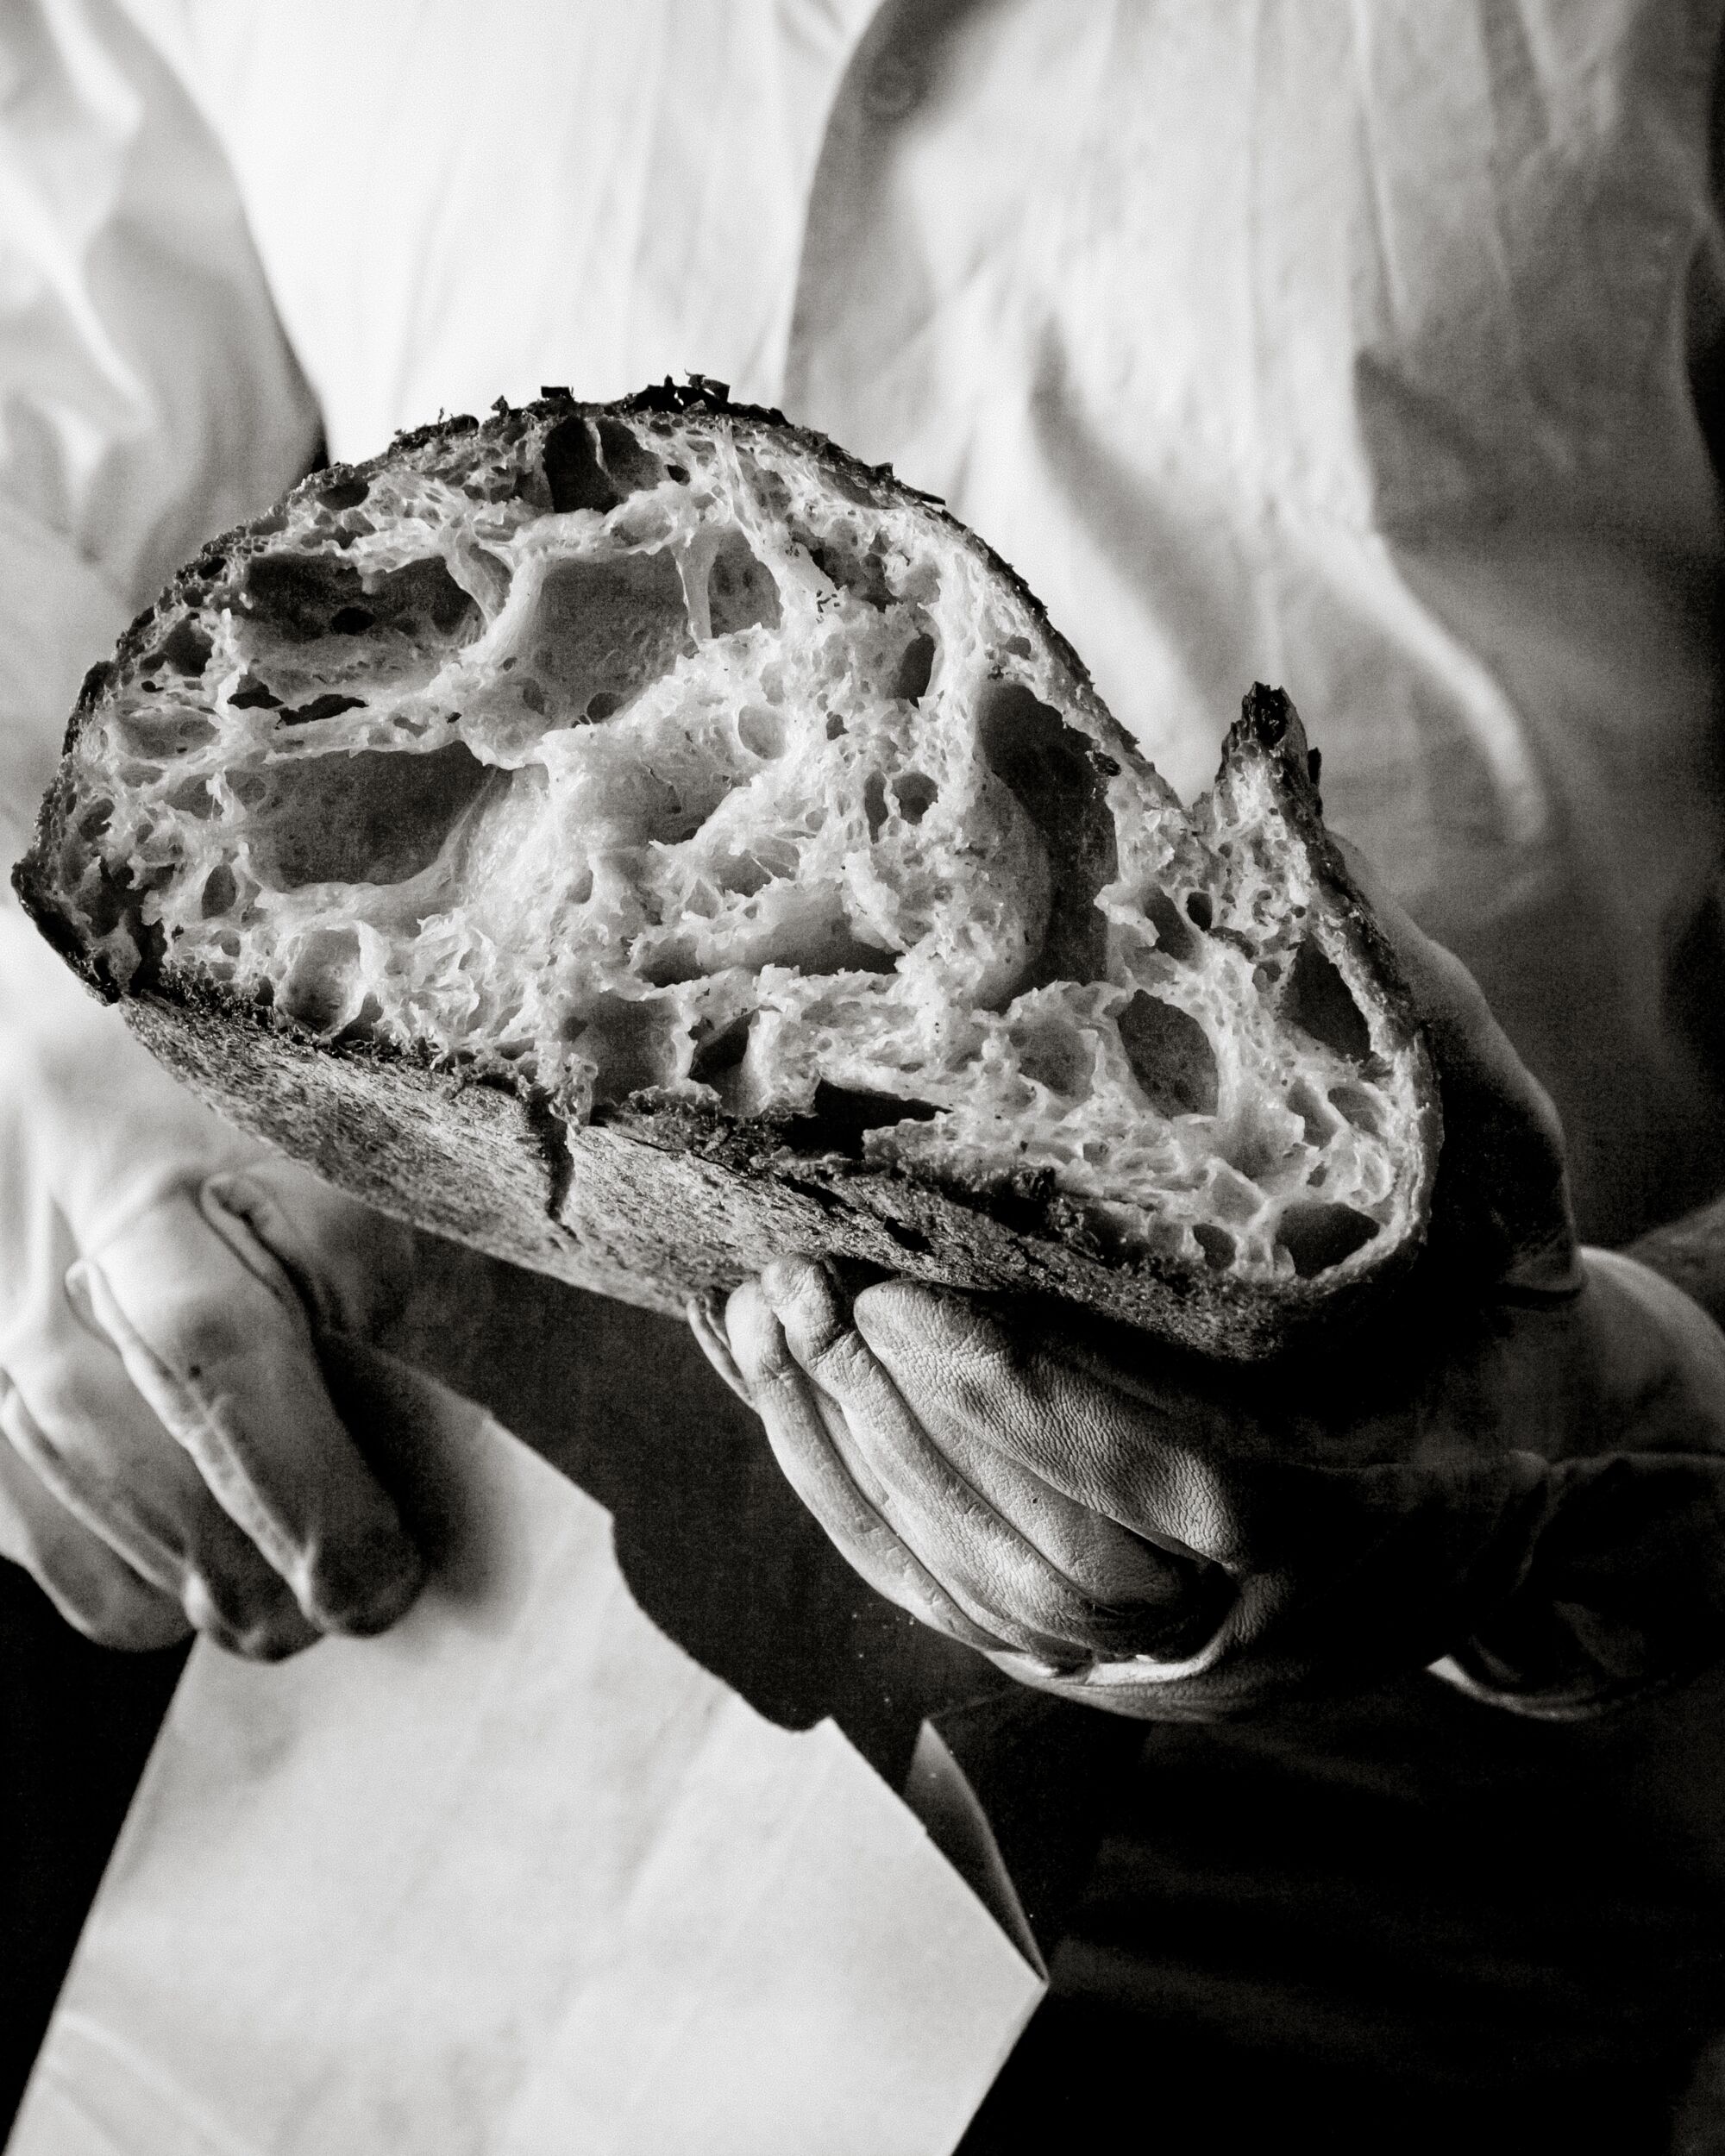 Eric Wolfinger's photo of a sourdough loaf for Chad Robertson's "Tartine Bread" cookbook.